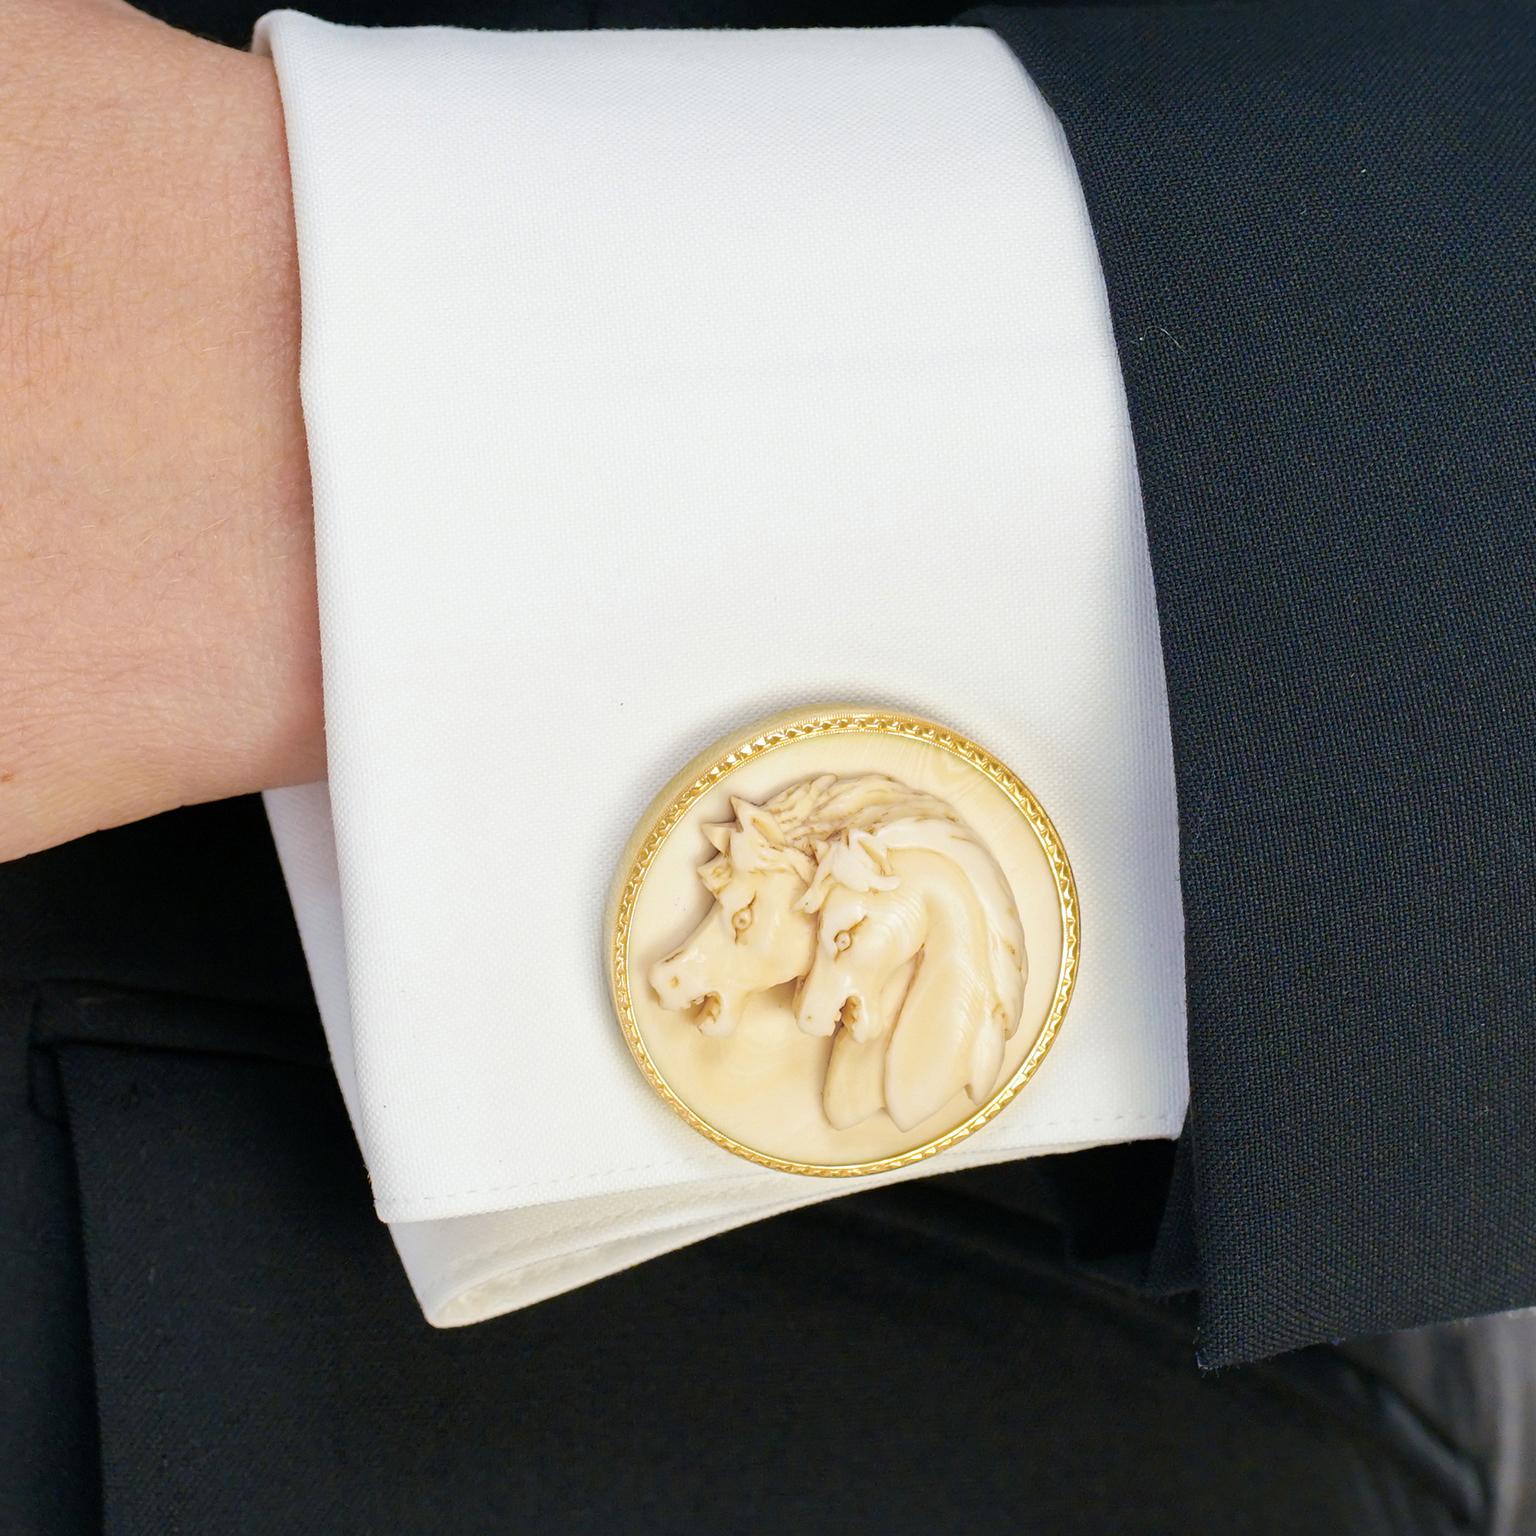 Circa 1960s, 14k, American. Decorated with what are clearly Japanese warhorses, these 14k gold cufflinks combine our fascination with all things Japanese with all things equine. Fabulously oversized with beautiful bone carvings, they are well-made